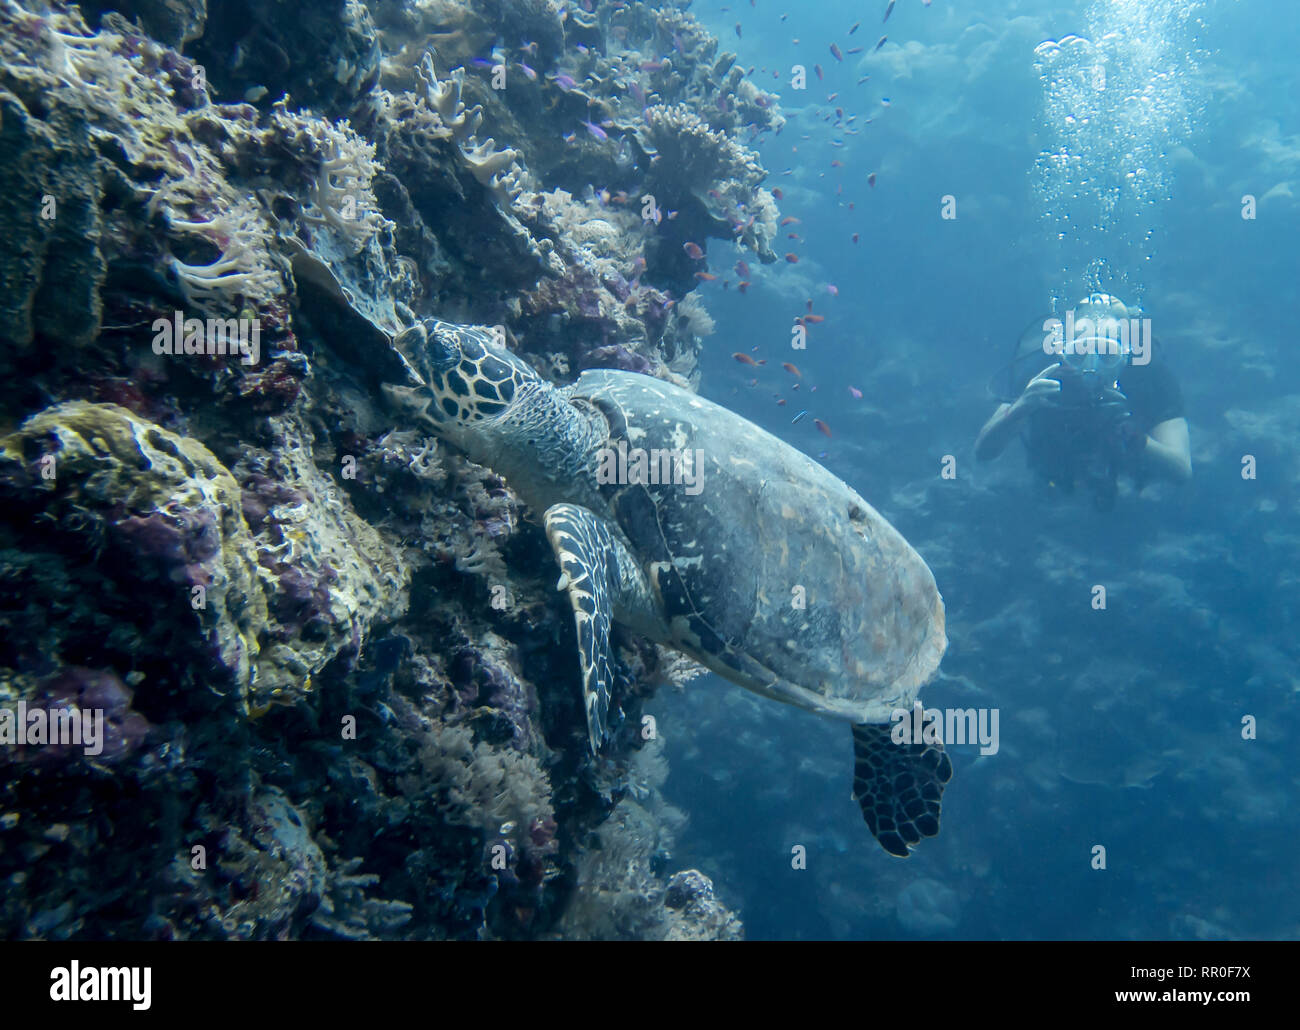 Hawksbill sea turtle bites and rips coral off of reef wall underwater in Palau. Stock Photo